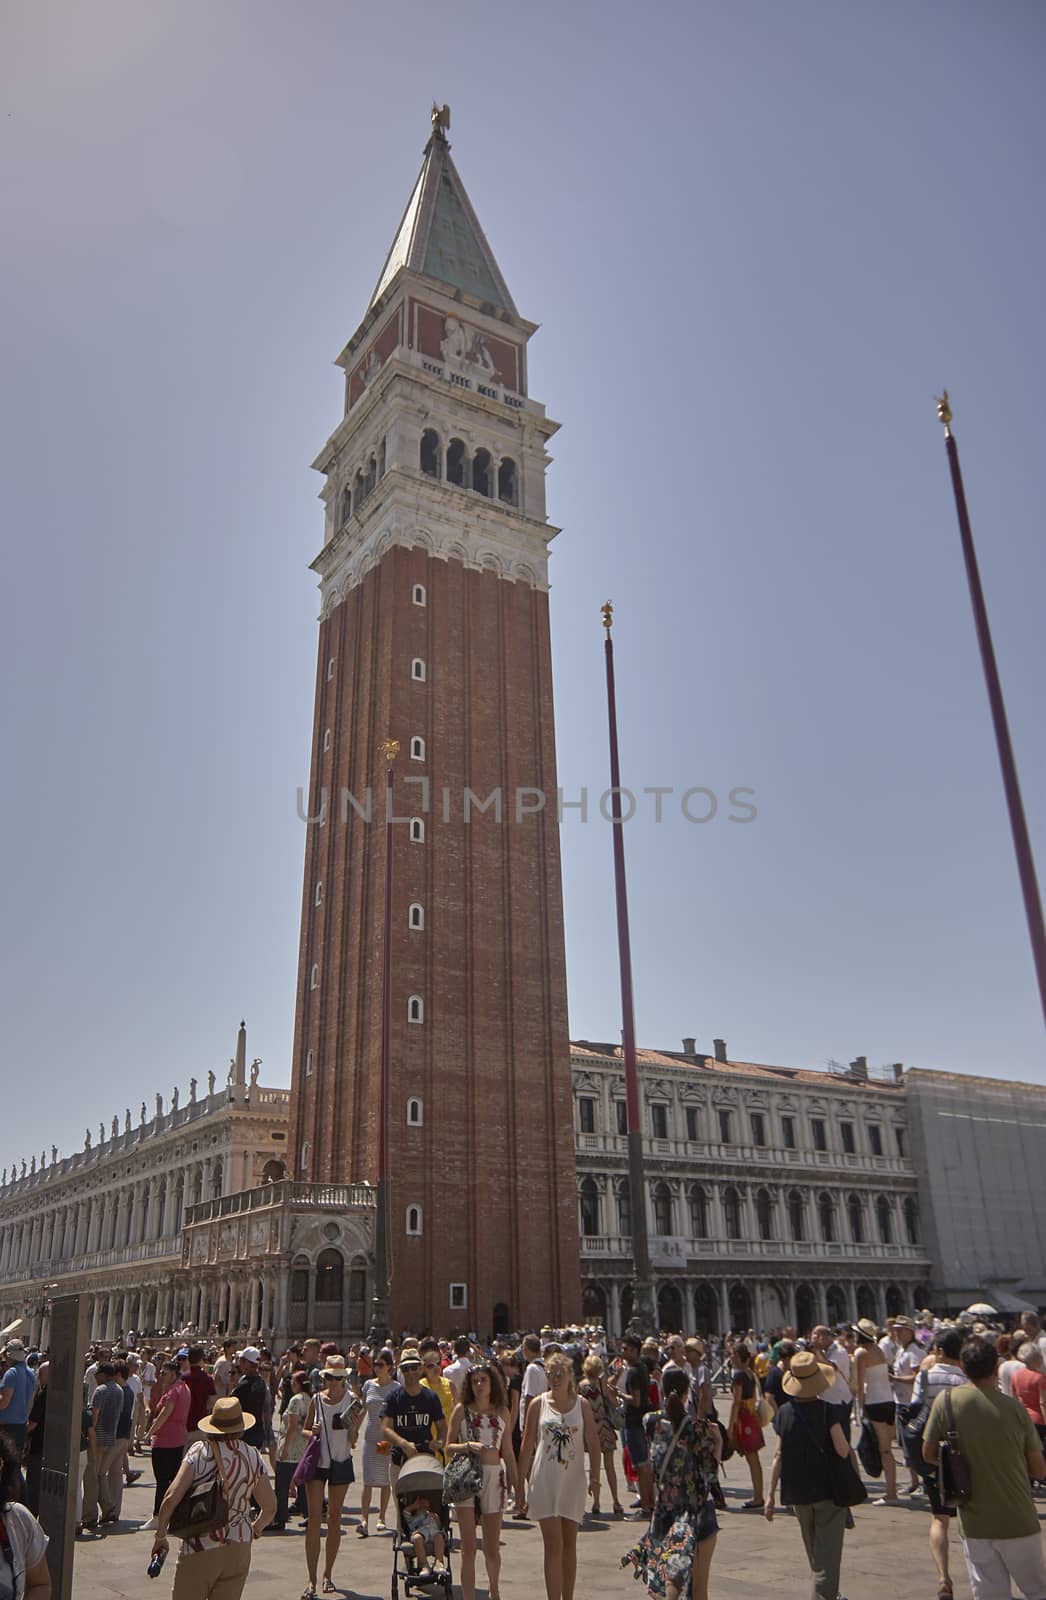 Full view of the bell tower of Saint Mark's Basilica in Venice.